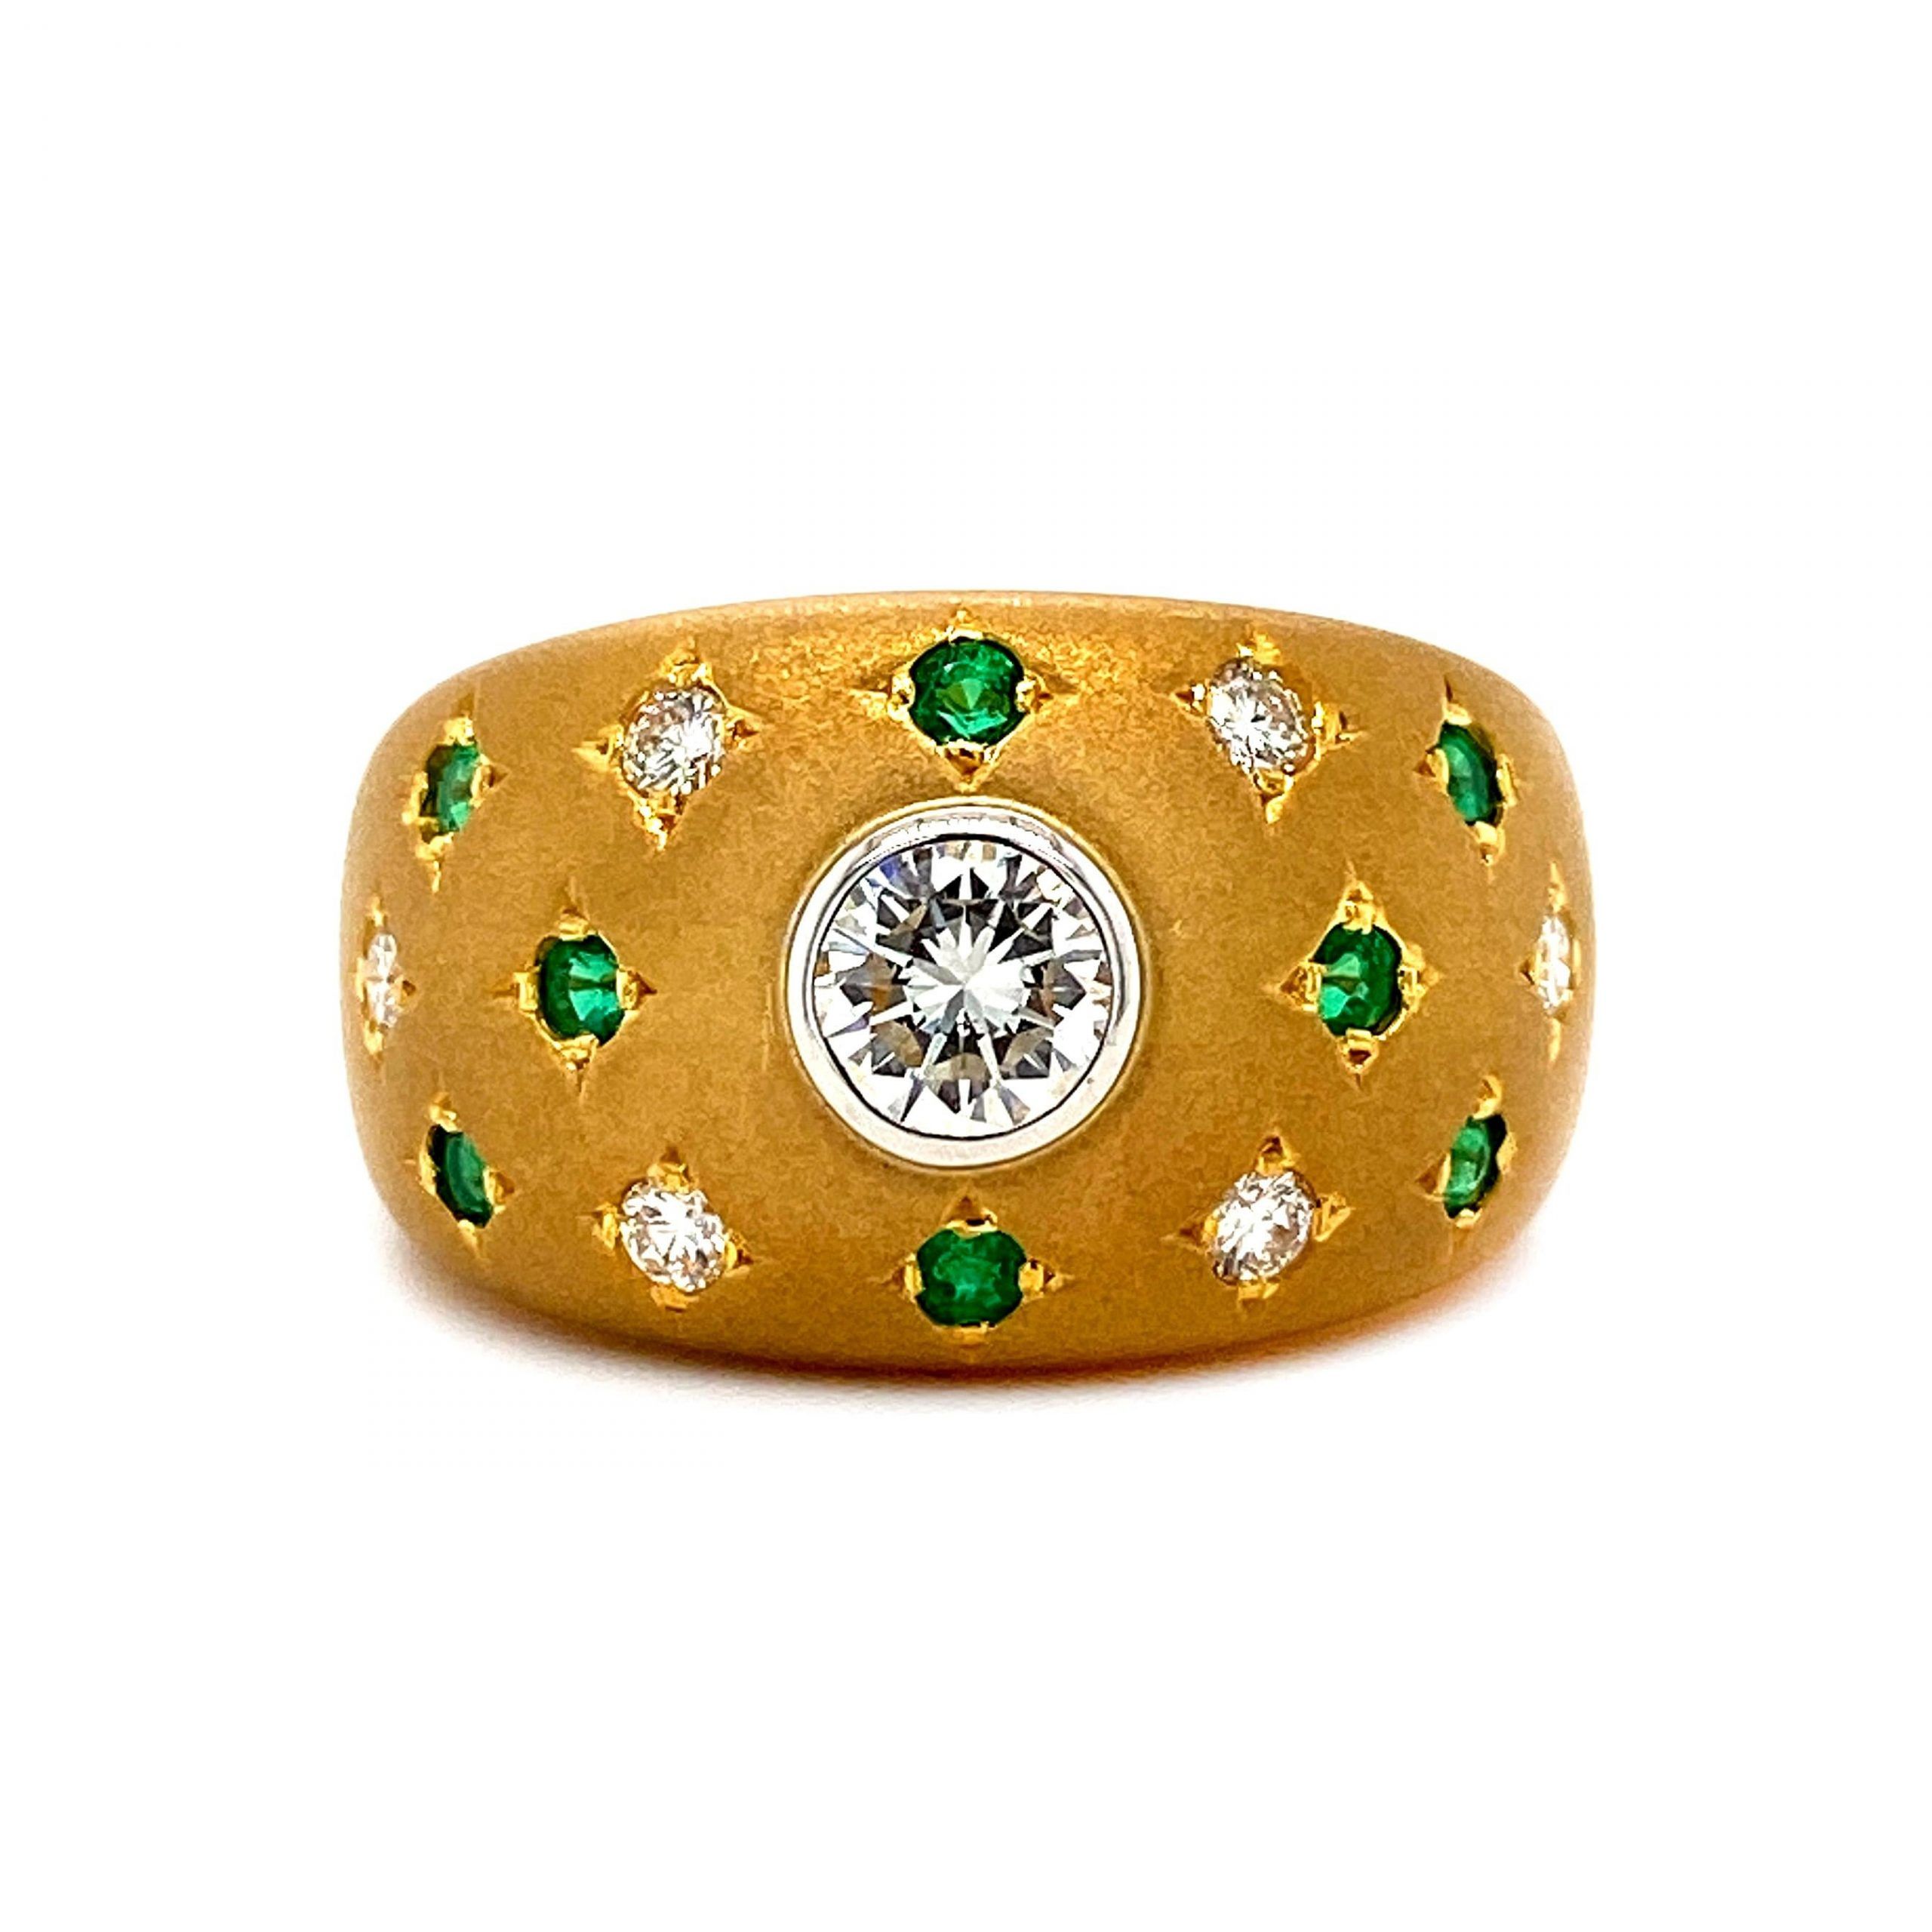 Starry Diamond And Emerald Artisanal Dome Ring In 18 Karat Gold For Sale At  1stdibs Inside Starry Diamond Dome Rings (View 5 of 25)